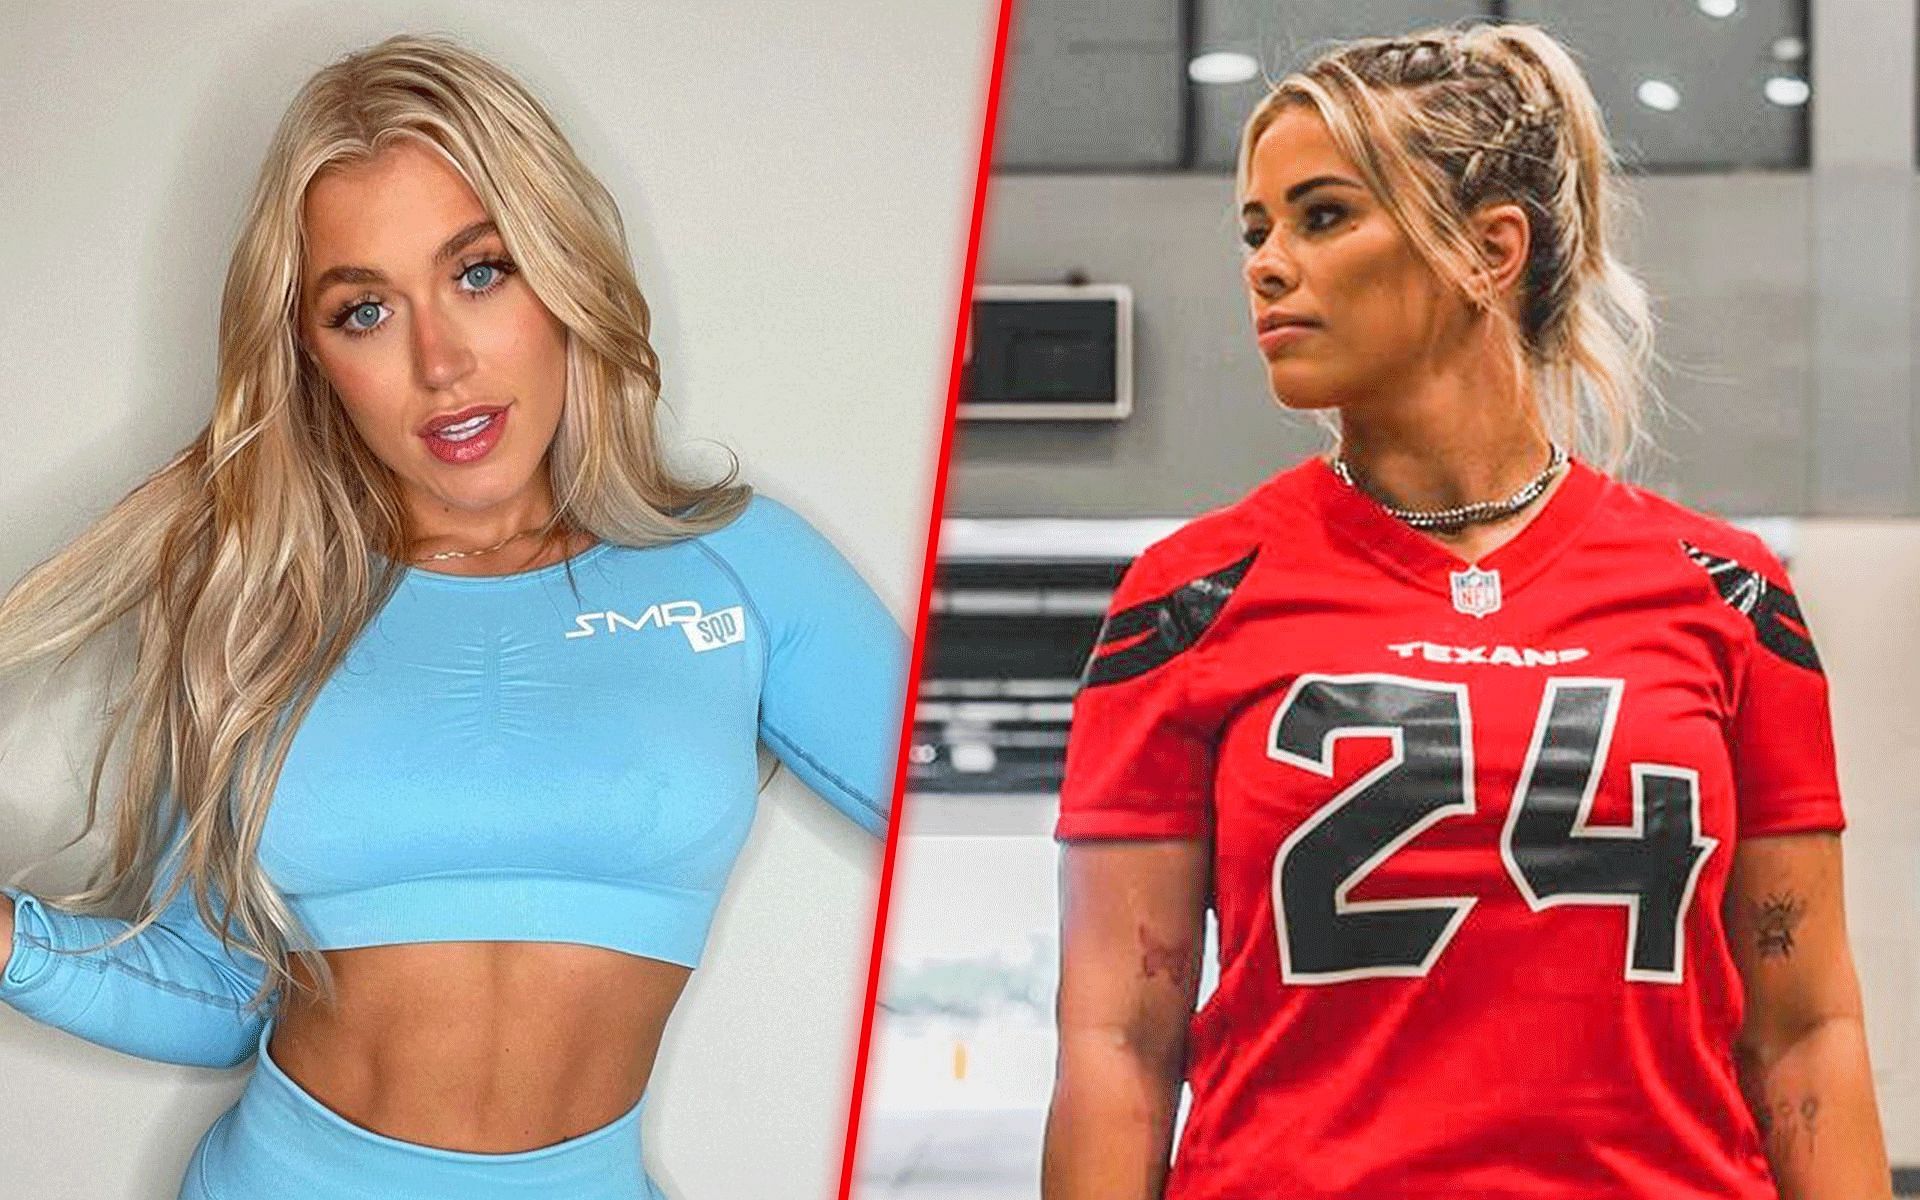 Elle Brooke (left) slams Paige VanZant (right) for avoiding conflict [Image via: @paigevanzant and @thedumbledong on Instagram] 